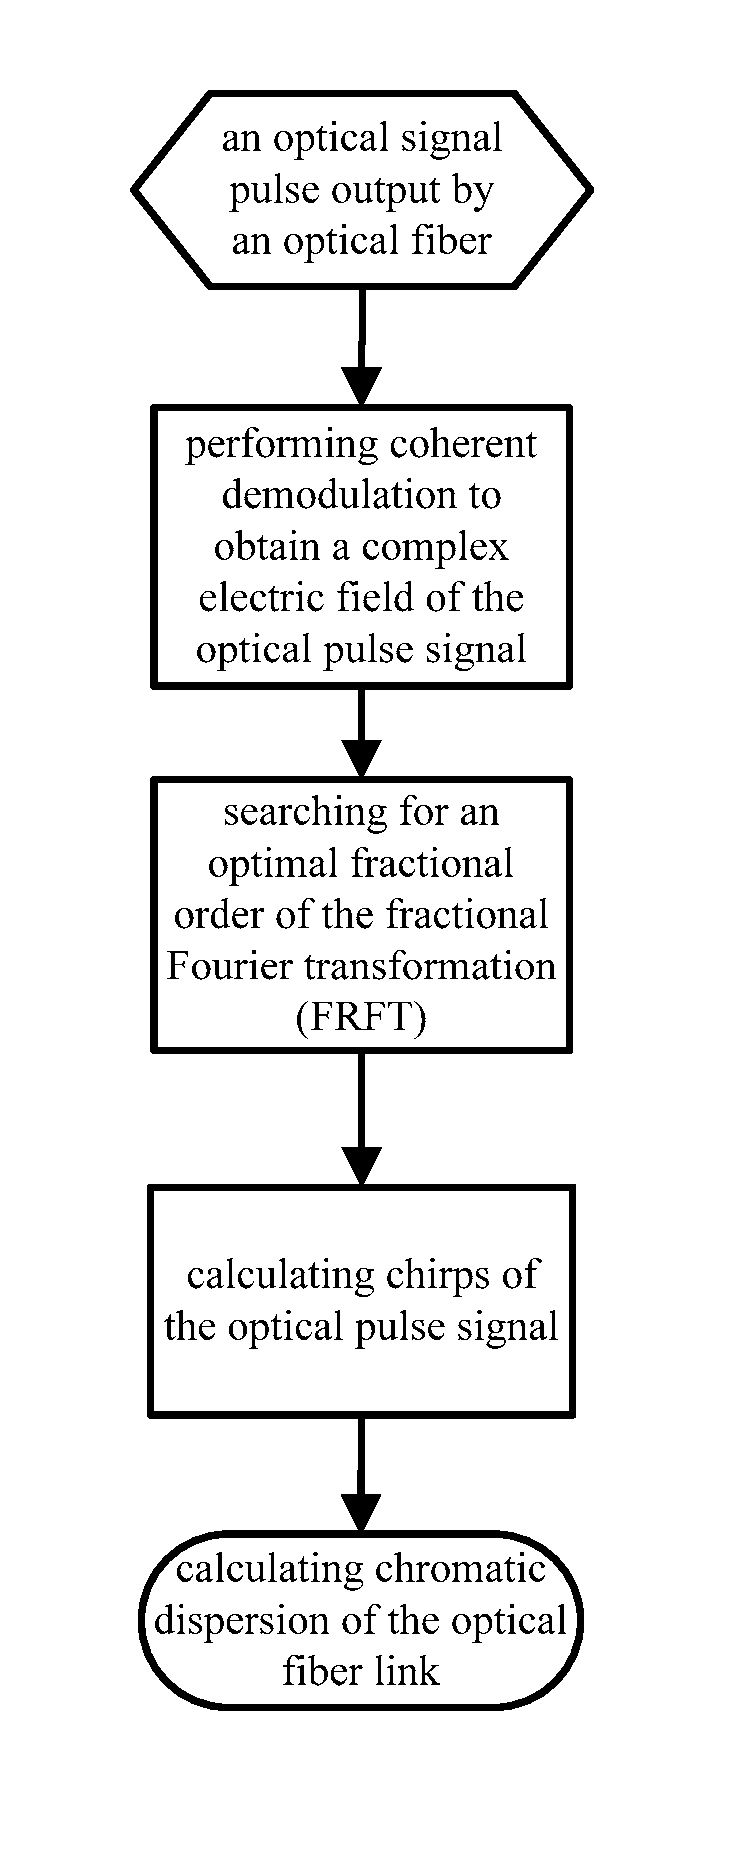 Method of measuring optical fiber link chromatic dispersion by fractional Fourier transformation (FRFT)